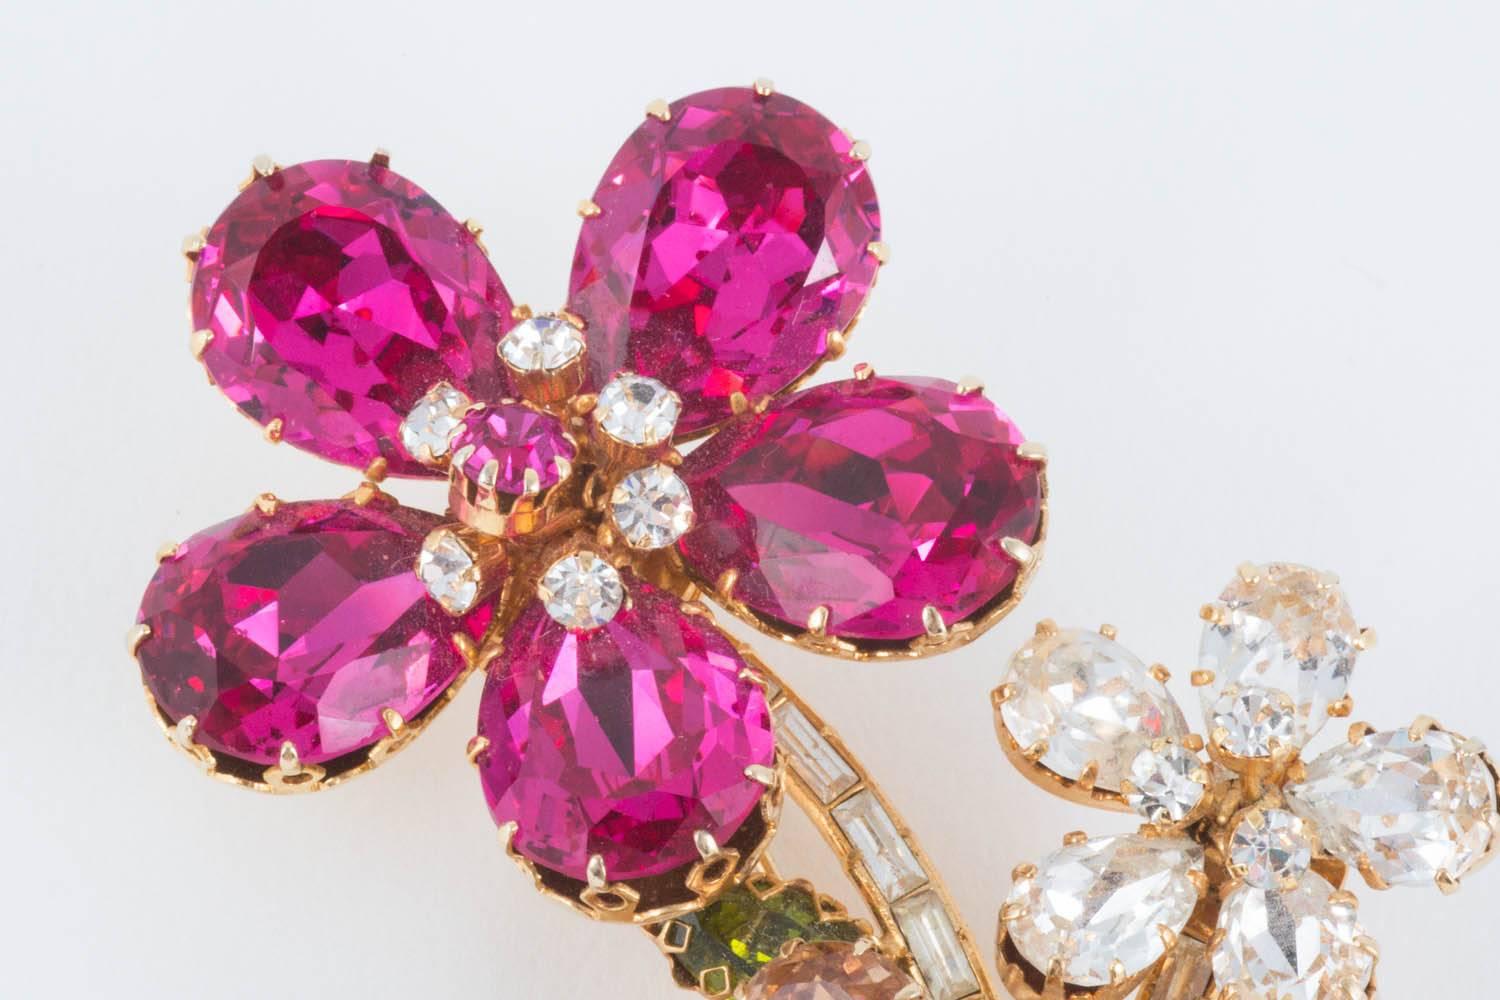 These beautiful and glamorous brooch was made by Schoffel and Co, one of the finest manufacturers of costume jewellery in the 1950s. With vivid clear colour and multifaceted cuts, giving a depth to each stone, this spray catches the light and